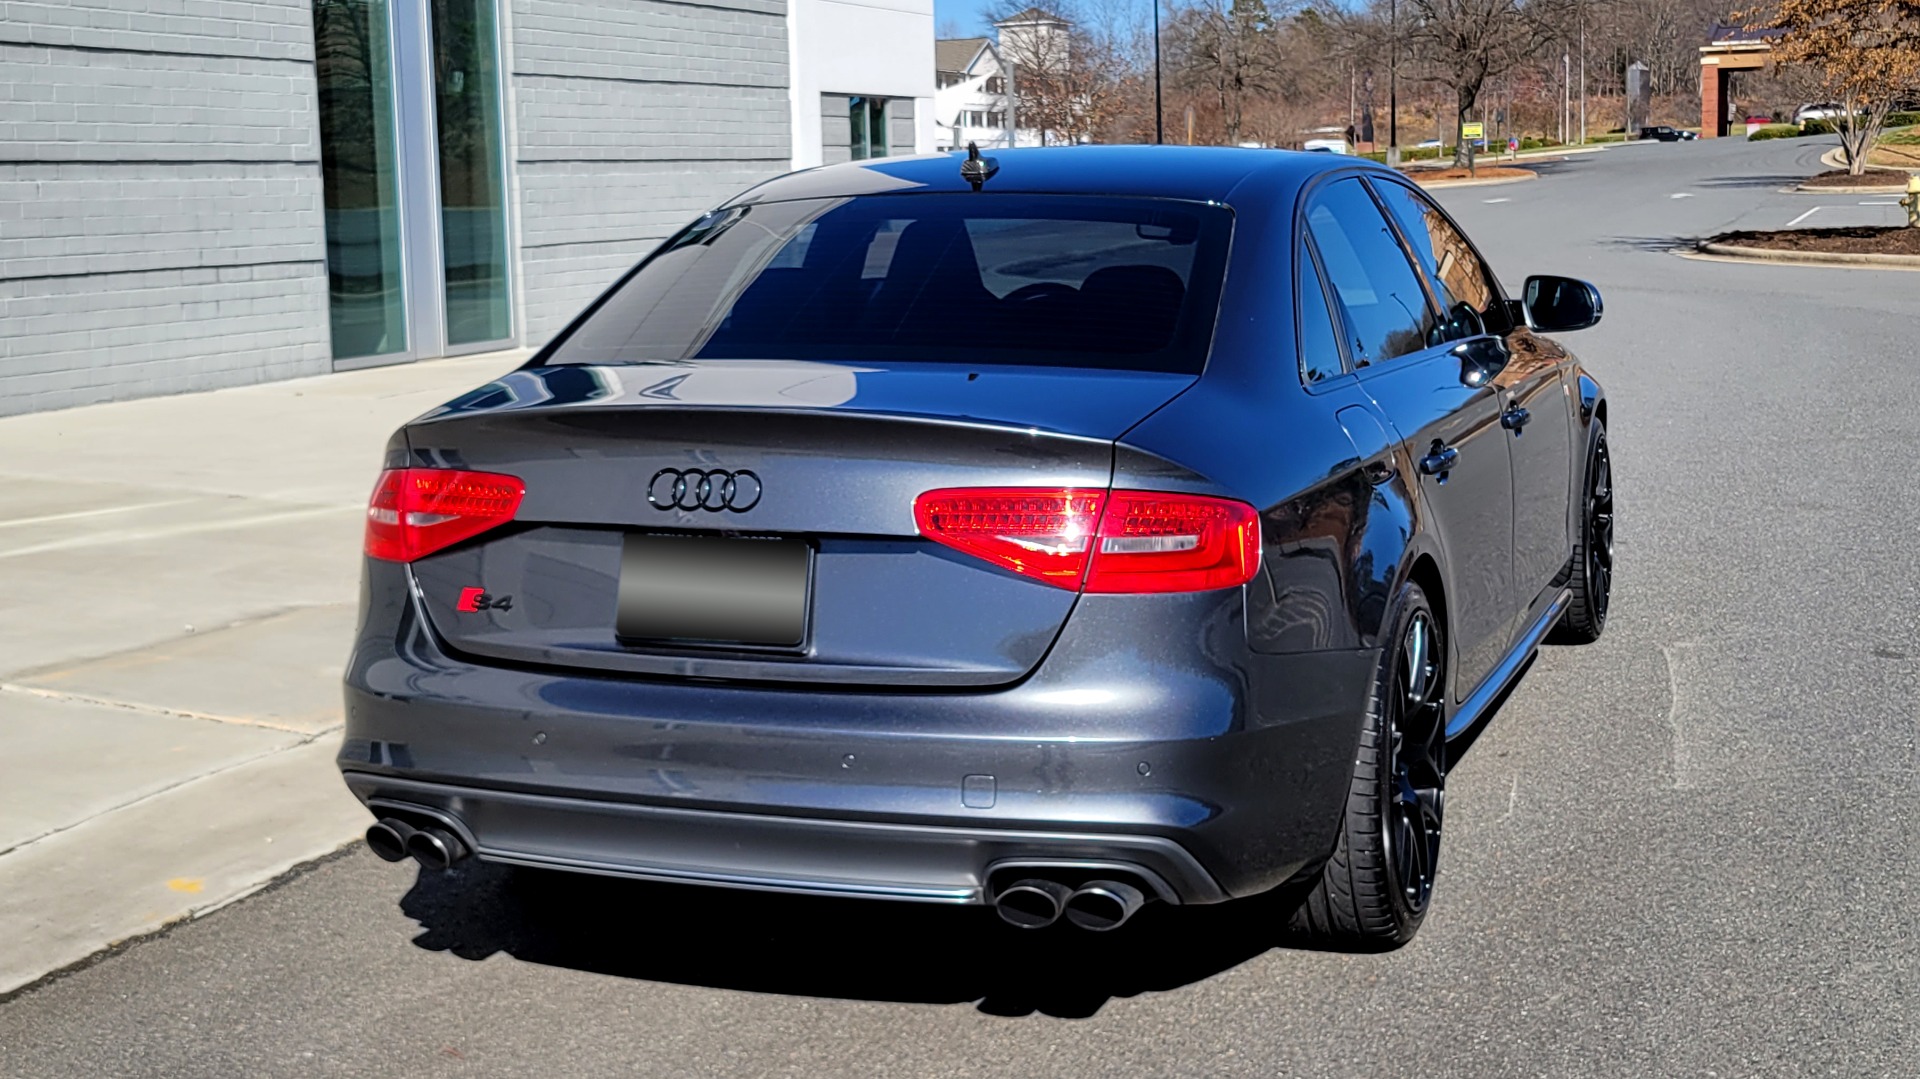 Used 2015 Audi S4 PREMIUM PLUS / TECH PKG / NAV / B&O SOUND / PARK SYS W/REARVIEW for sale Sold at Formula Imports in Charlotte NC 28227 10